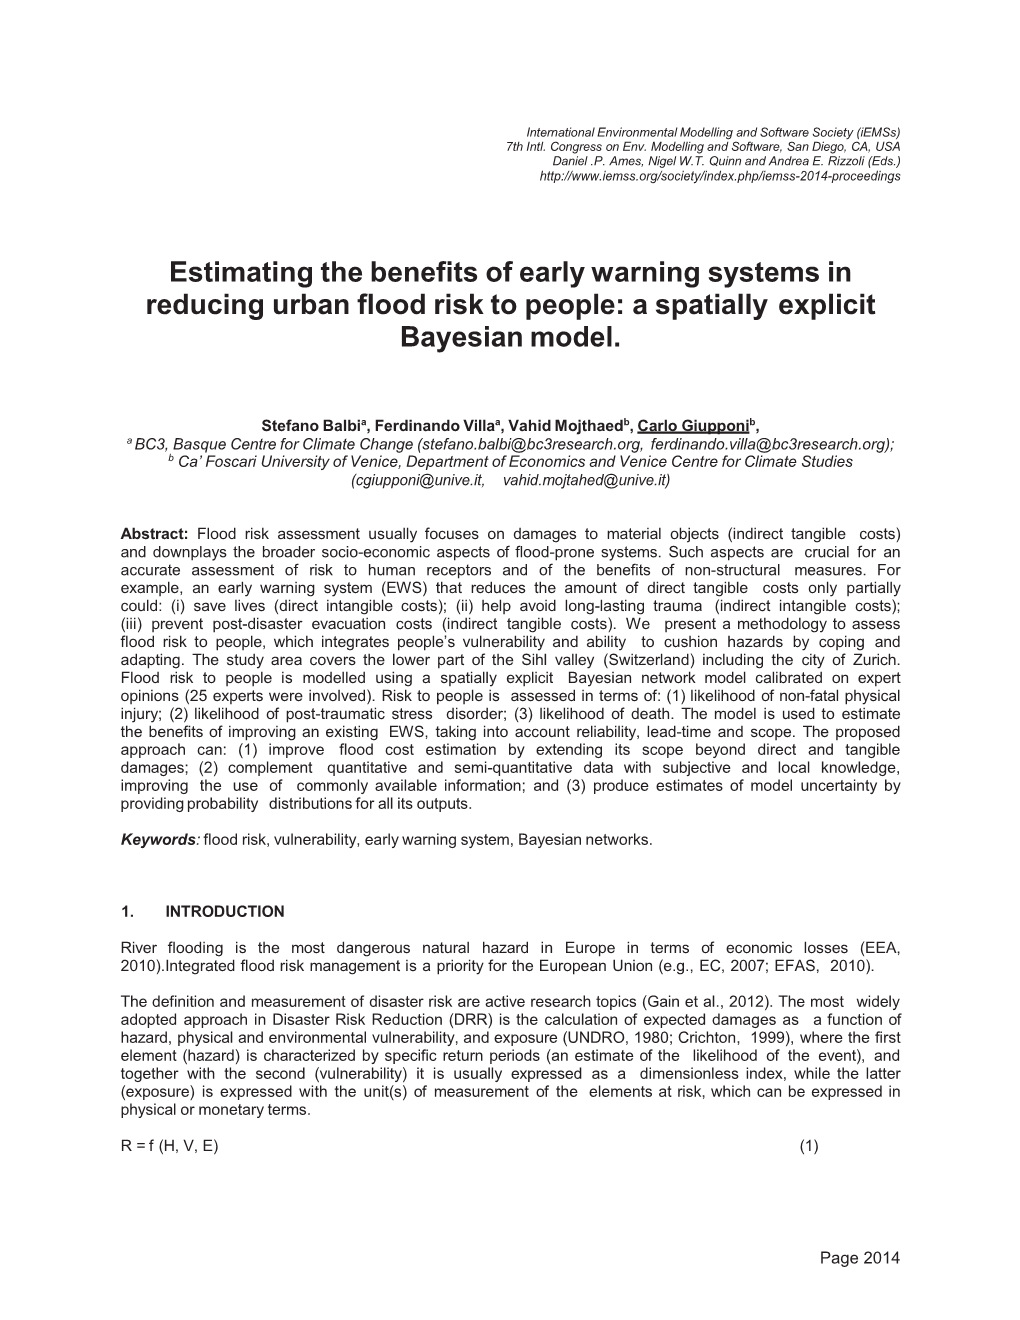 Estimating the Benefits of Early Warning Systems in Reducing Urban Flood Risk to People: a Spatially Explicit Bayesian Model